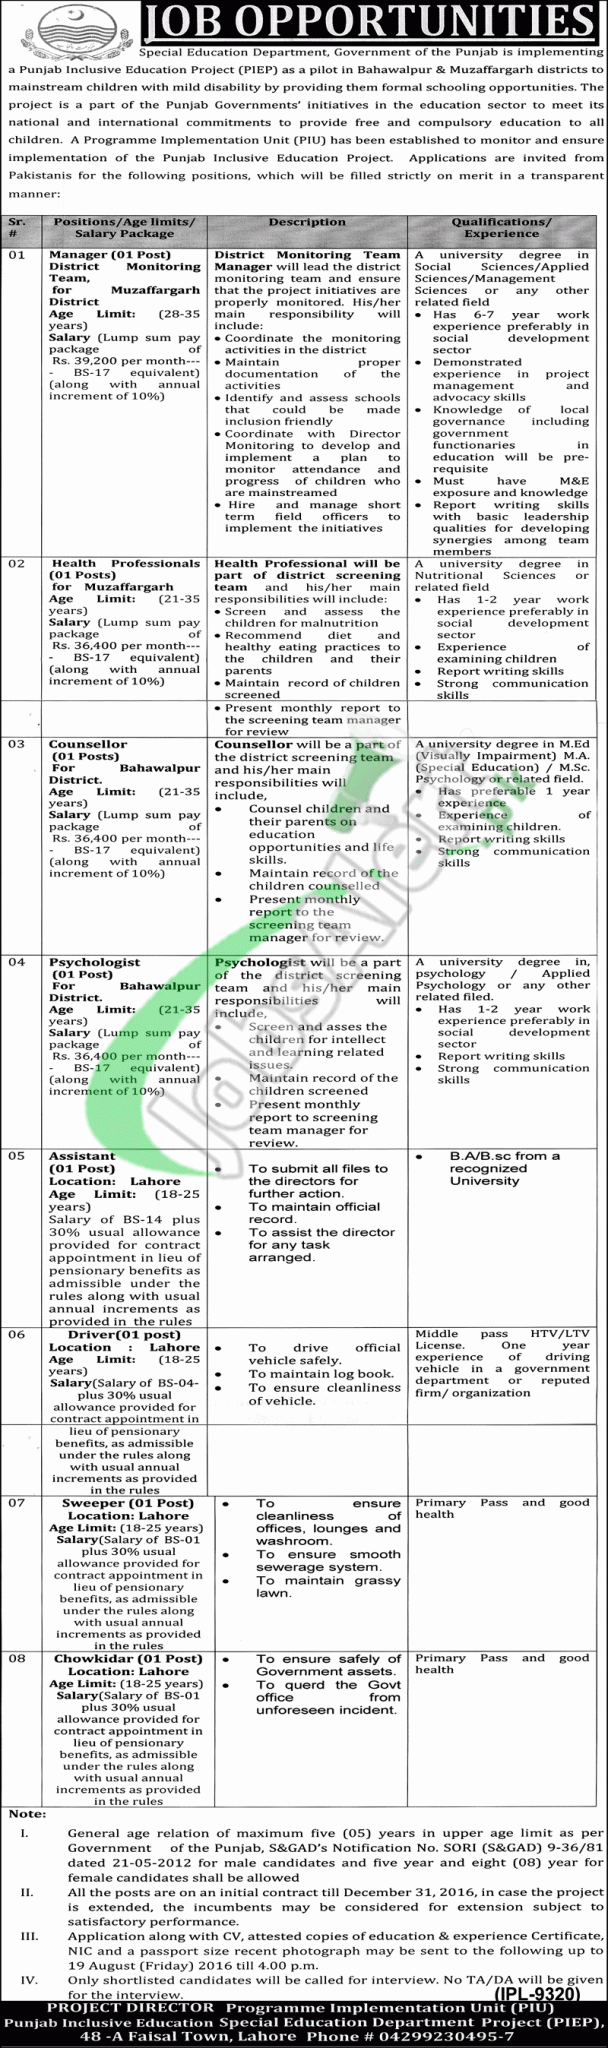 Special Education Department Jobs